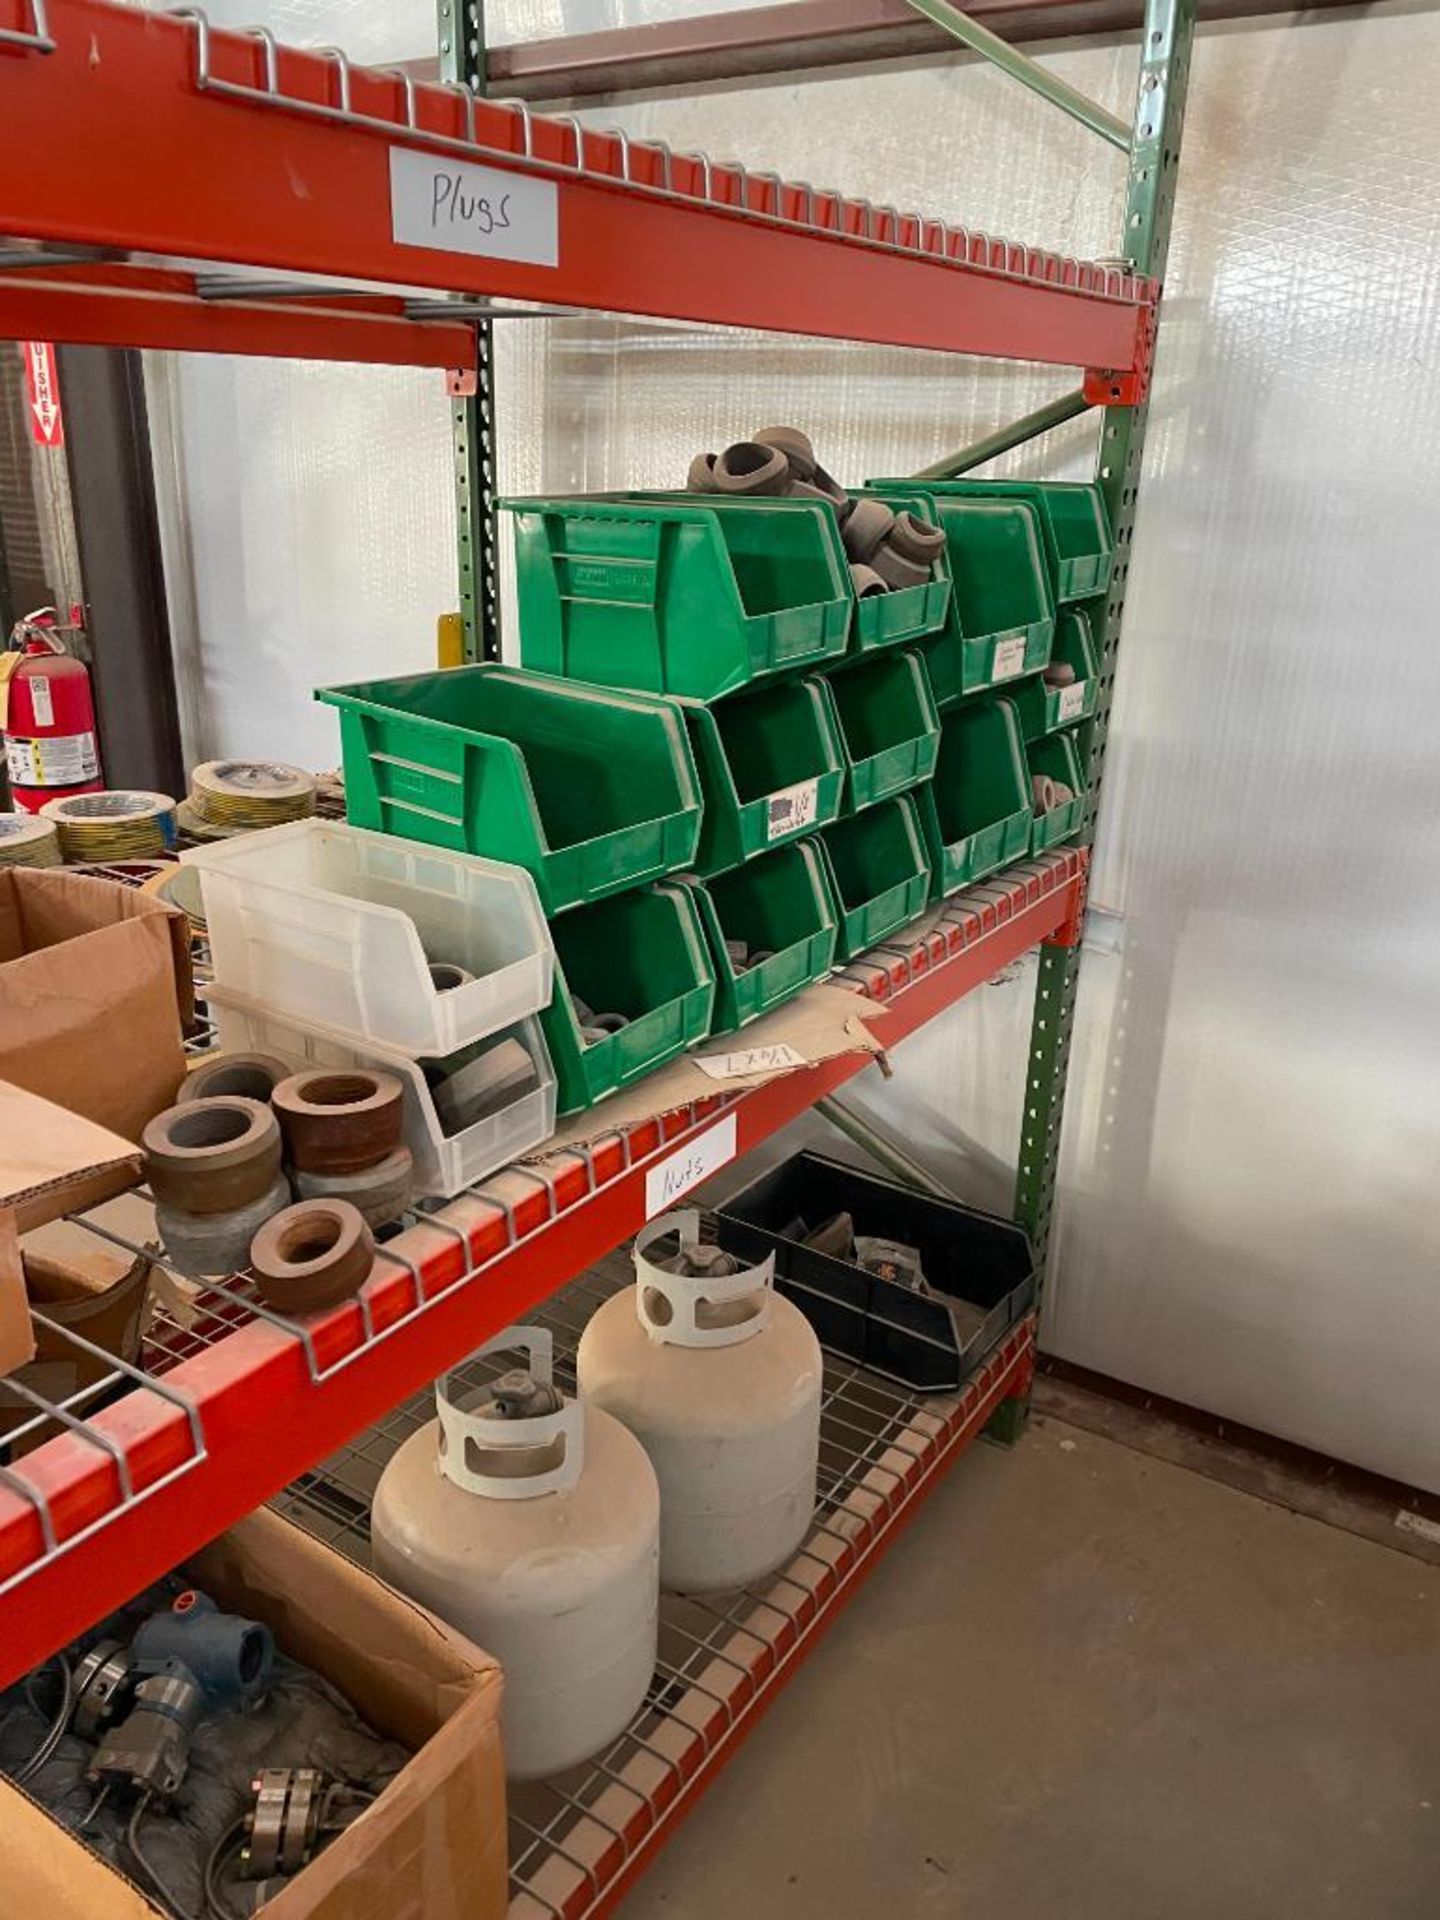 CONTENT OF SHELVING IN SHIPPING AND RECEIVING BUILDING: NEW VALVES, FLEX SEAL GASKETS, PIPE FITTINGS - Image 16 of 20